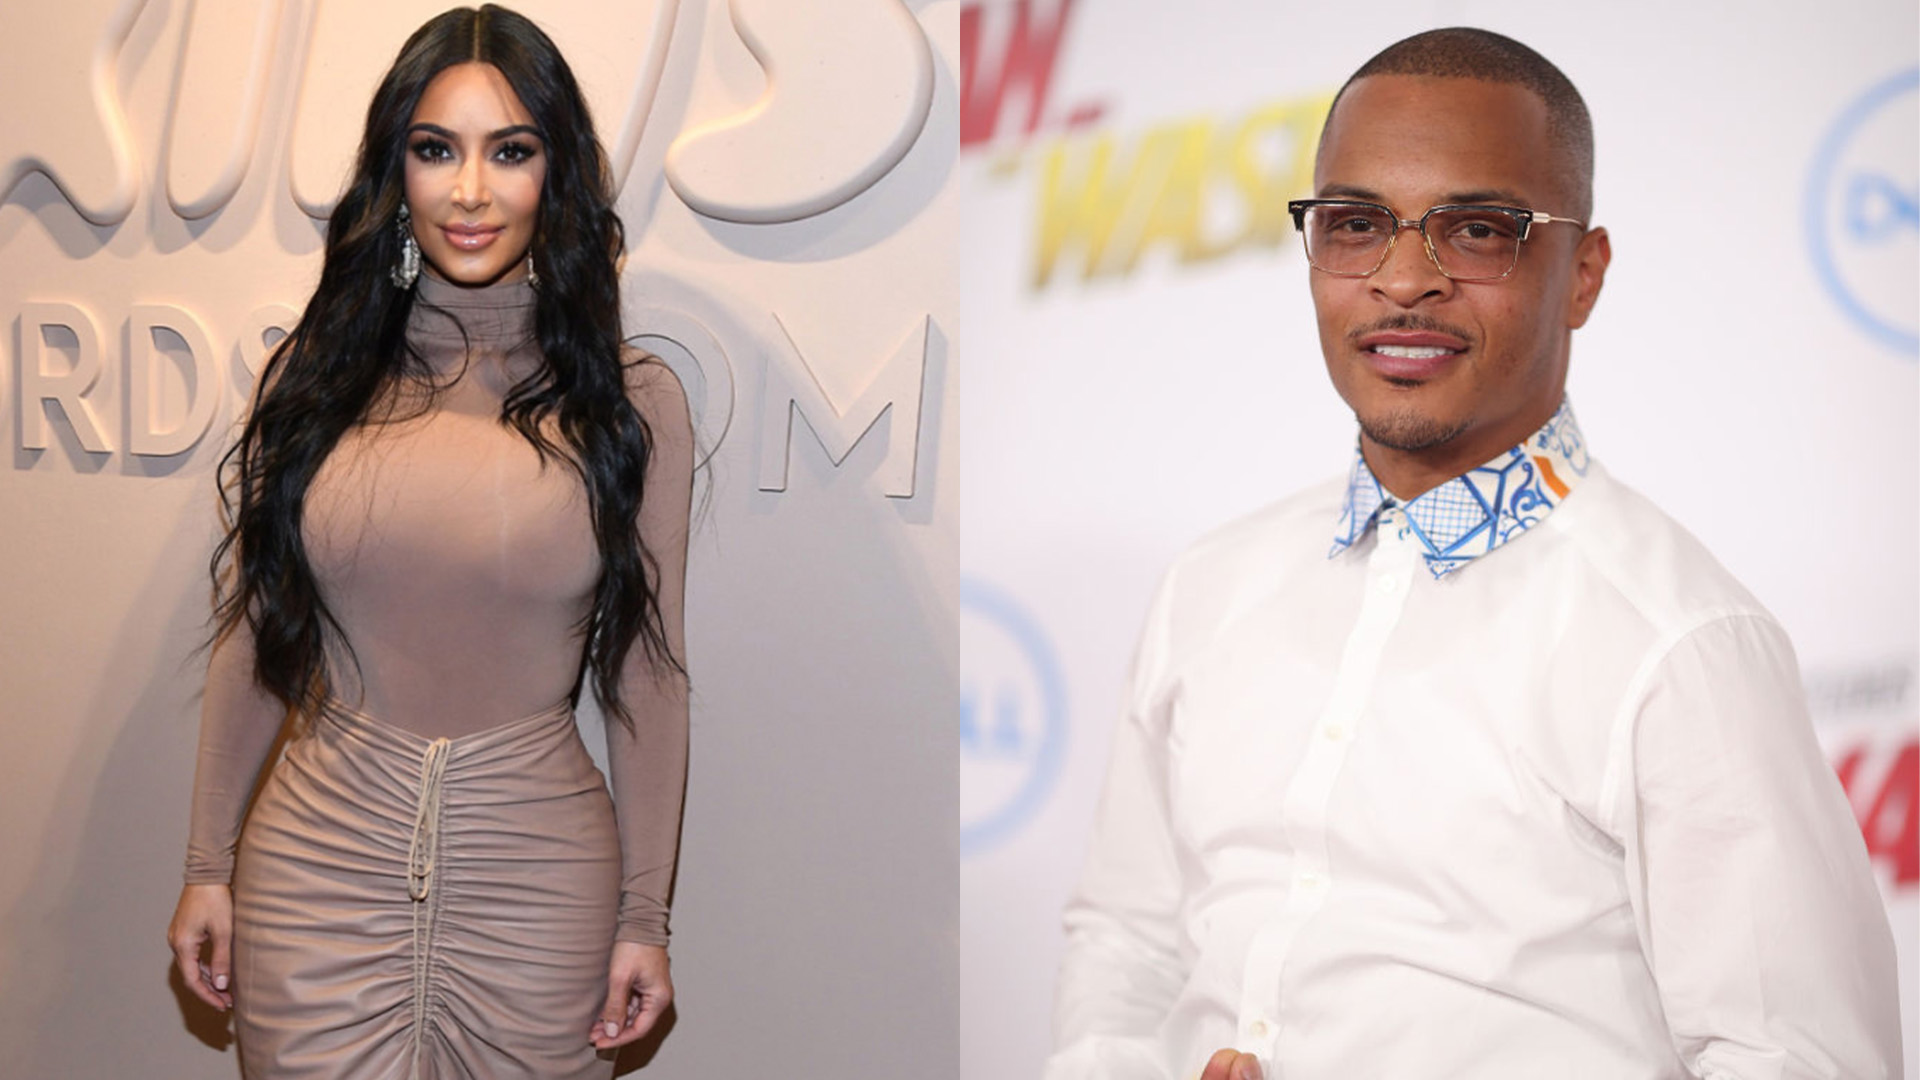 Kim Kardashian Has To Pay A $1.26M Fine And T.I. Once Faced A $75K Penalty — Here's What We Know About SEC Filings And Disclosures